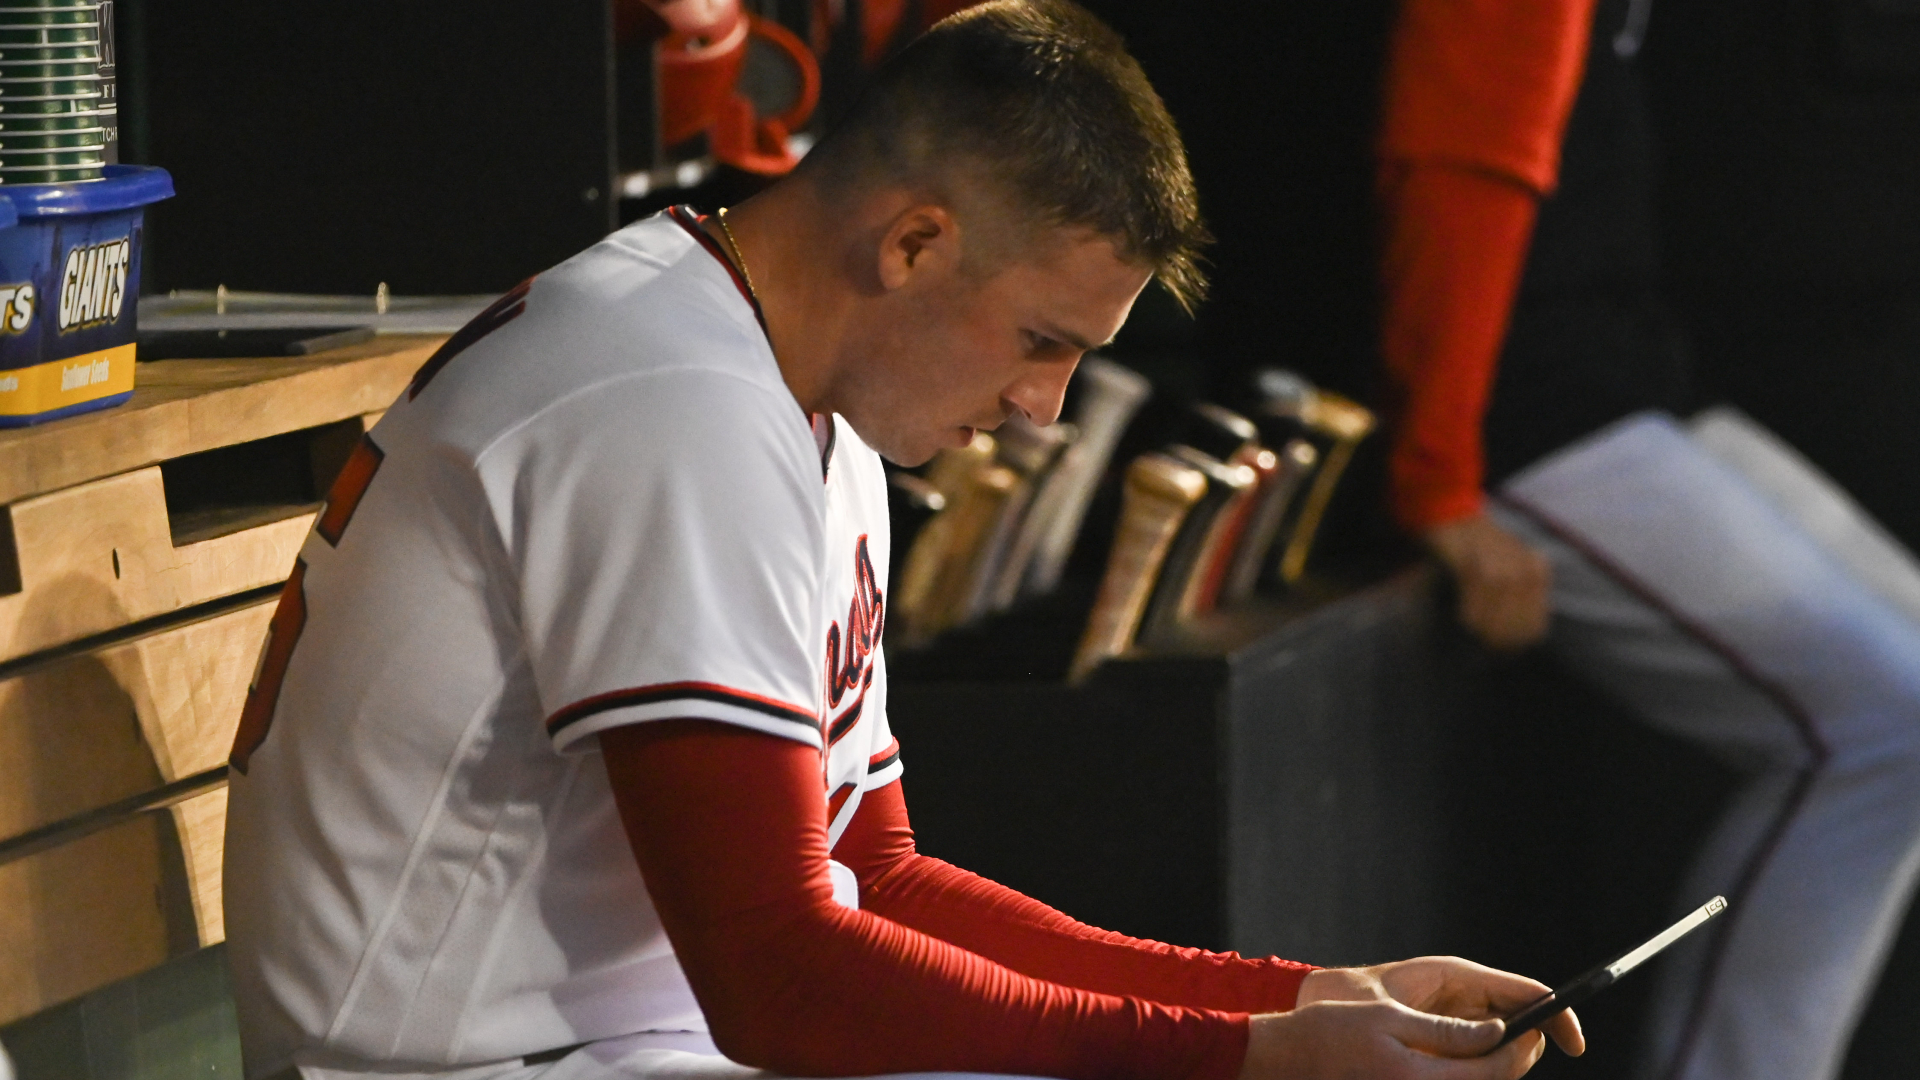 Patrick Corbin studies a tablet during his start against the Giants